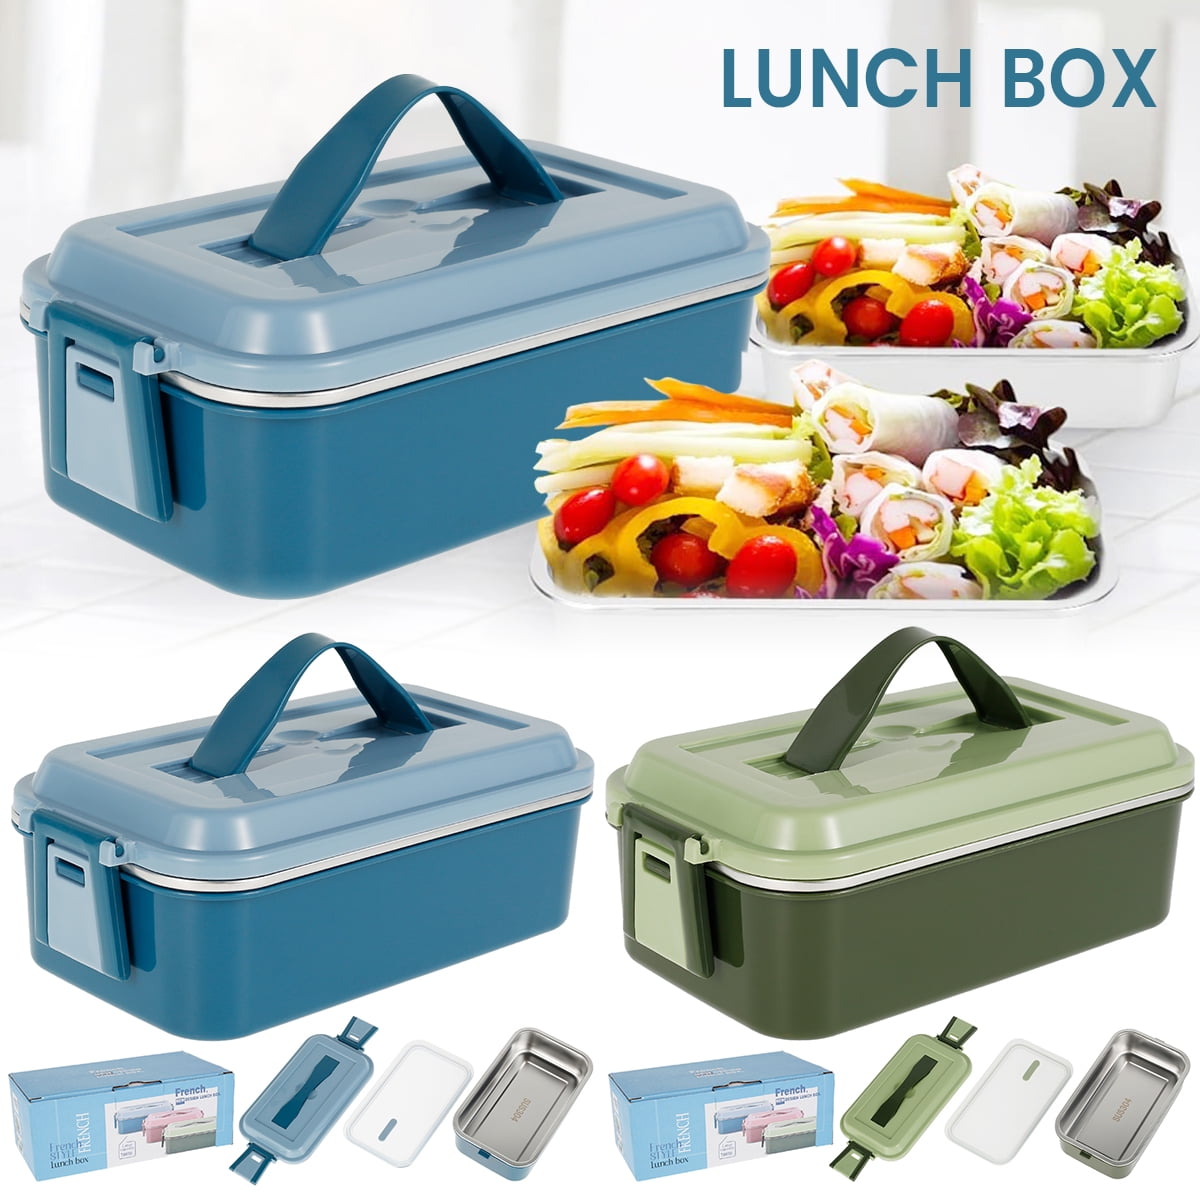 Thermal Insulated Lunch Box Portable Picnic School Bento Food Container YS